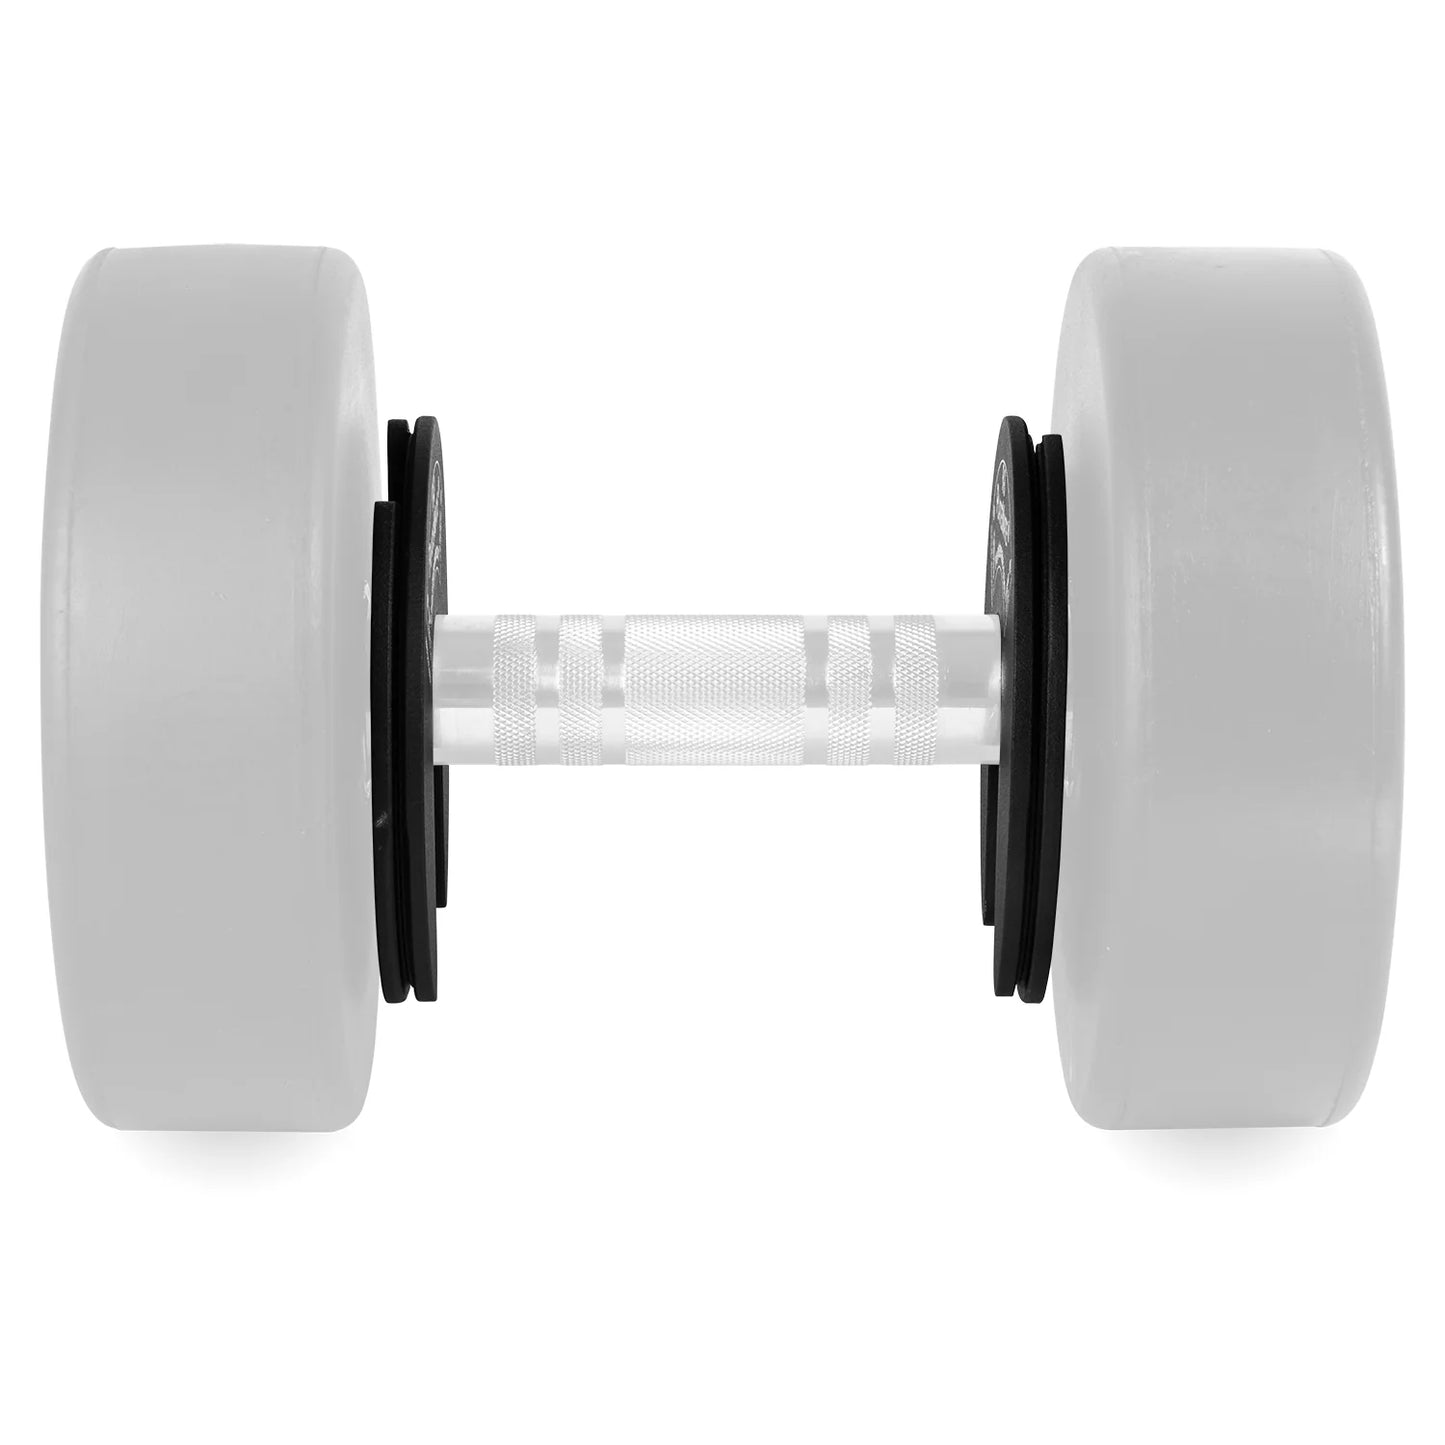 R-3 Magnetic Add-On Weights (Pair) - By PlateMate